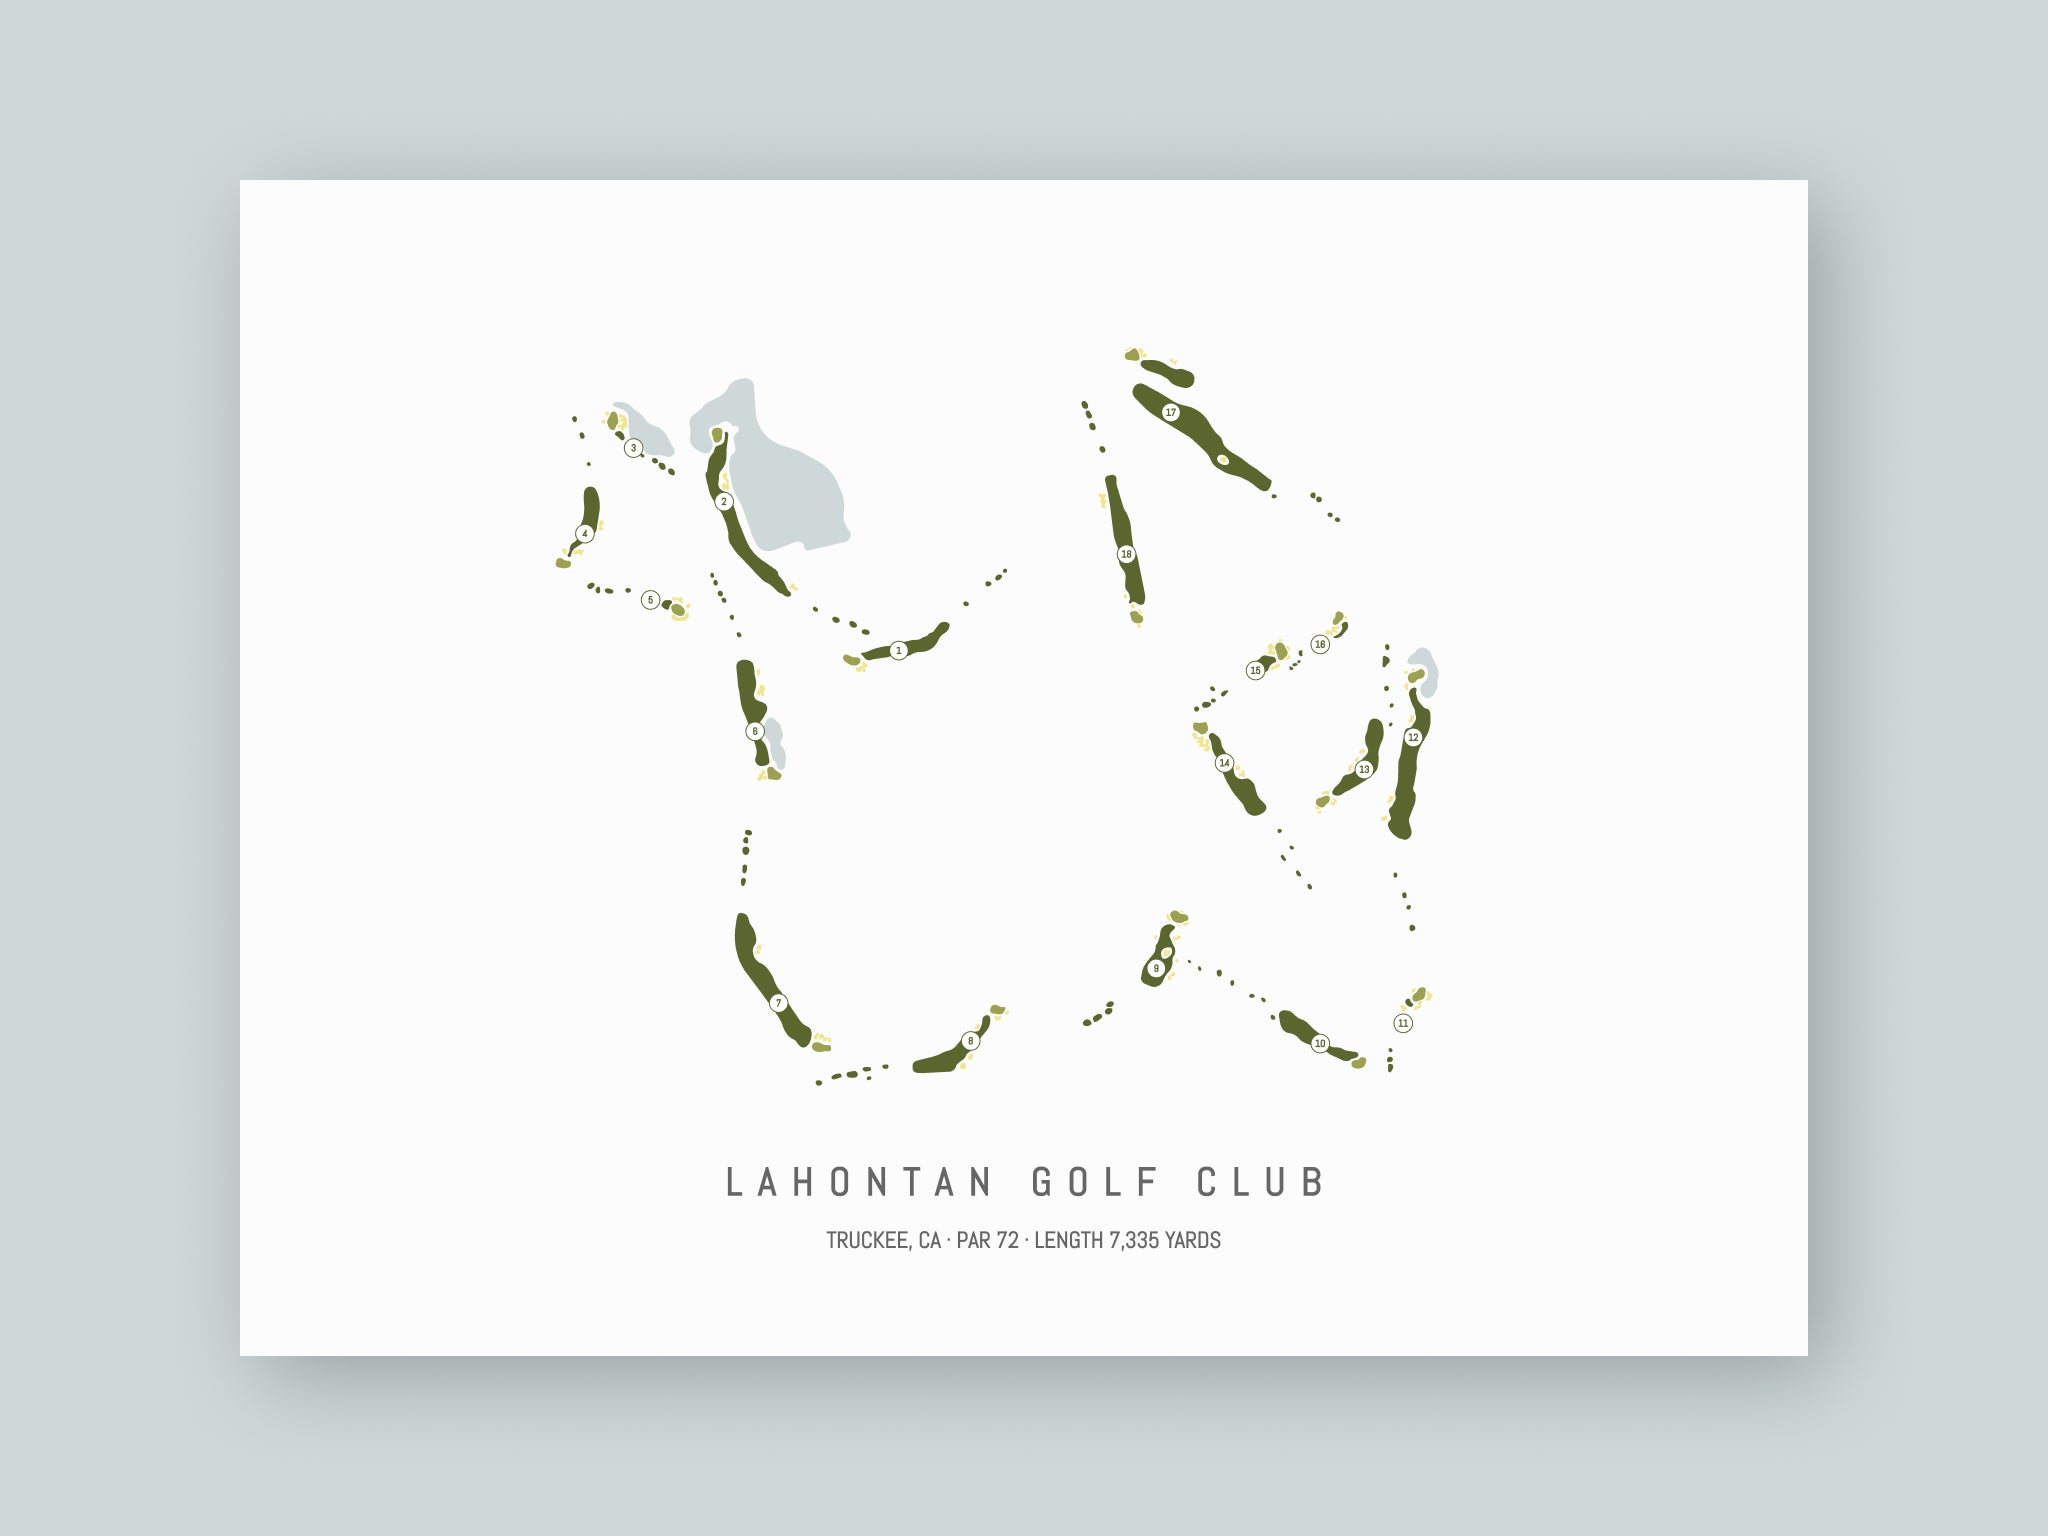 Lahontan-Golf-Club-CA--Unframed-24x18-With-Hole-Numbers